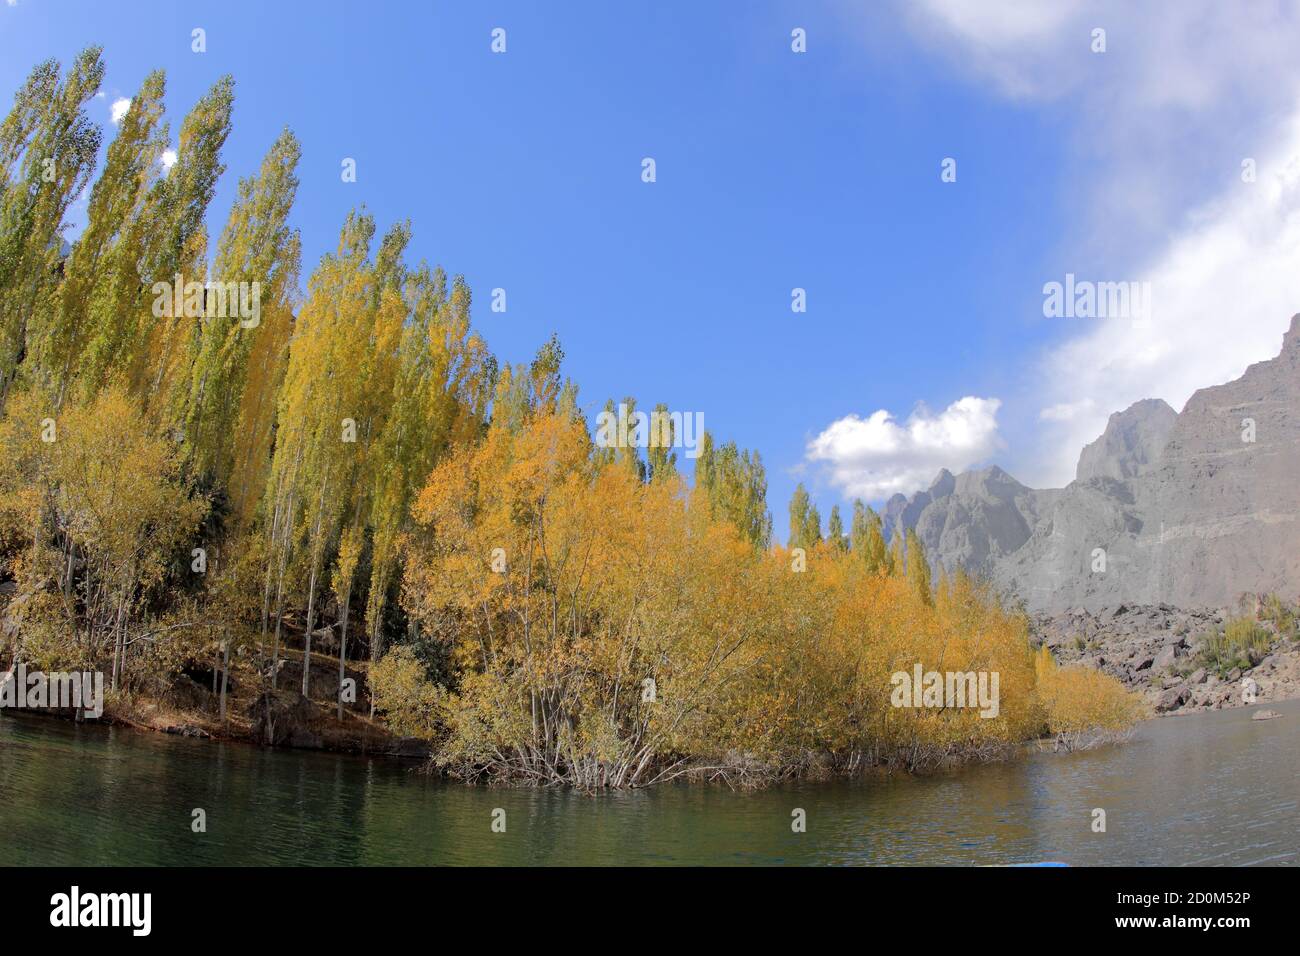 The Kachura Lakes are three lakes in the Skardu District of Gilgit-Baltistan, northern Pakistan. The lakes, at 2,500 metres in elevation, Stock Photo